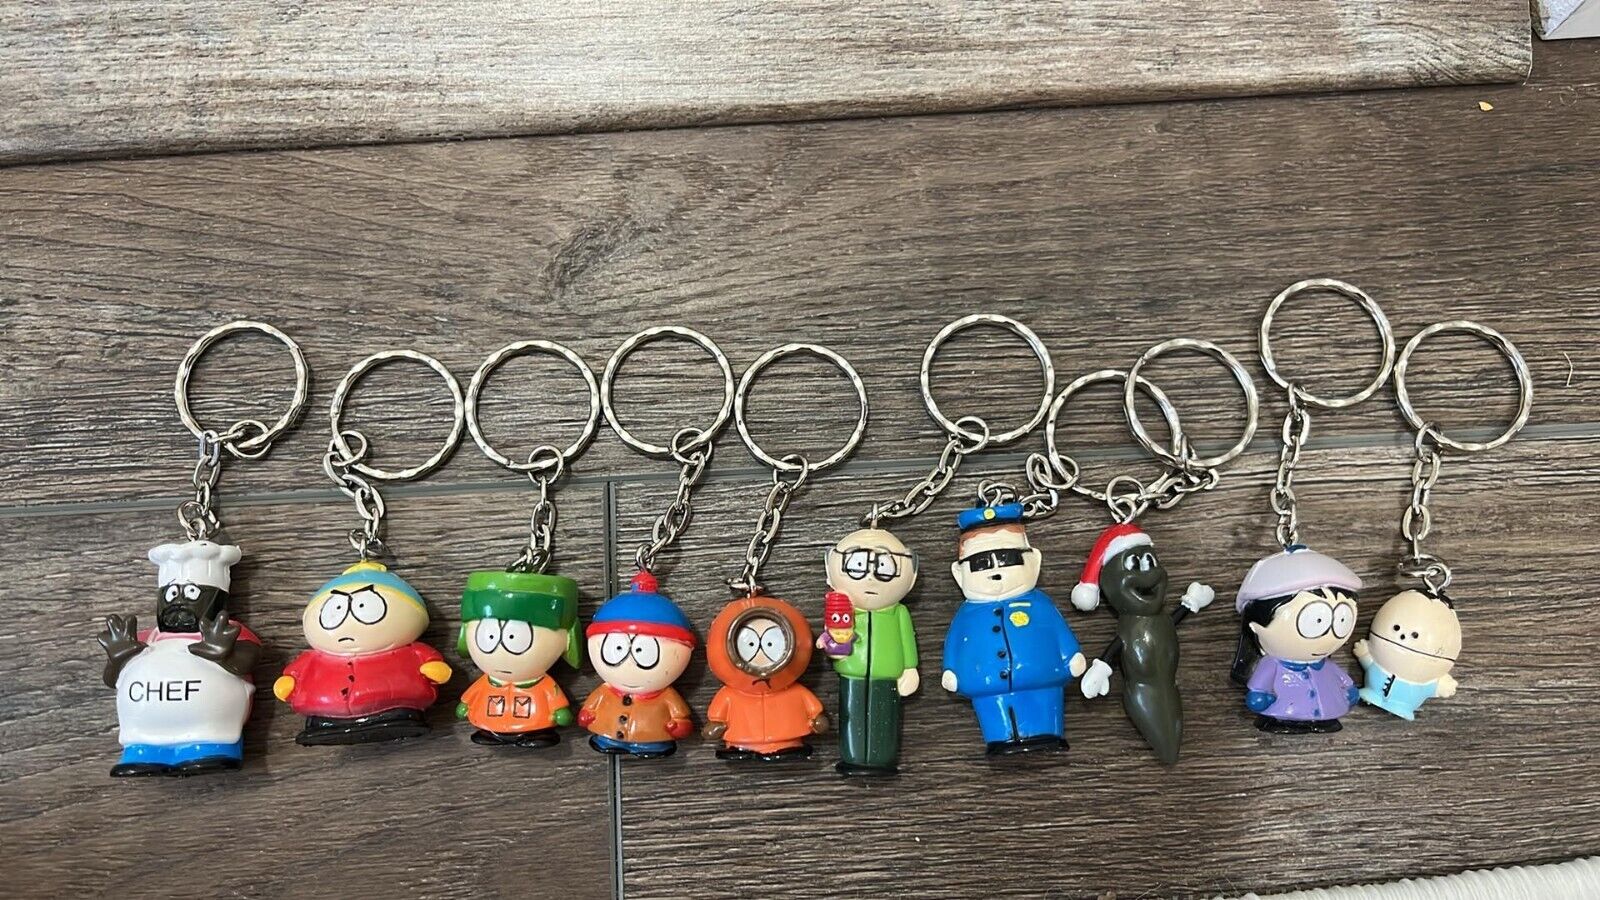 1998 South Park Mini Figure Keychain Fun 4 All Lot Keychains Small 1 inch